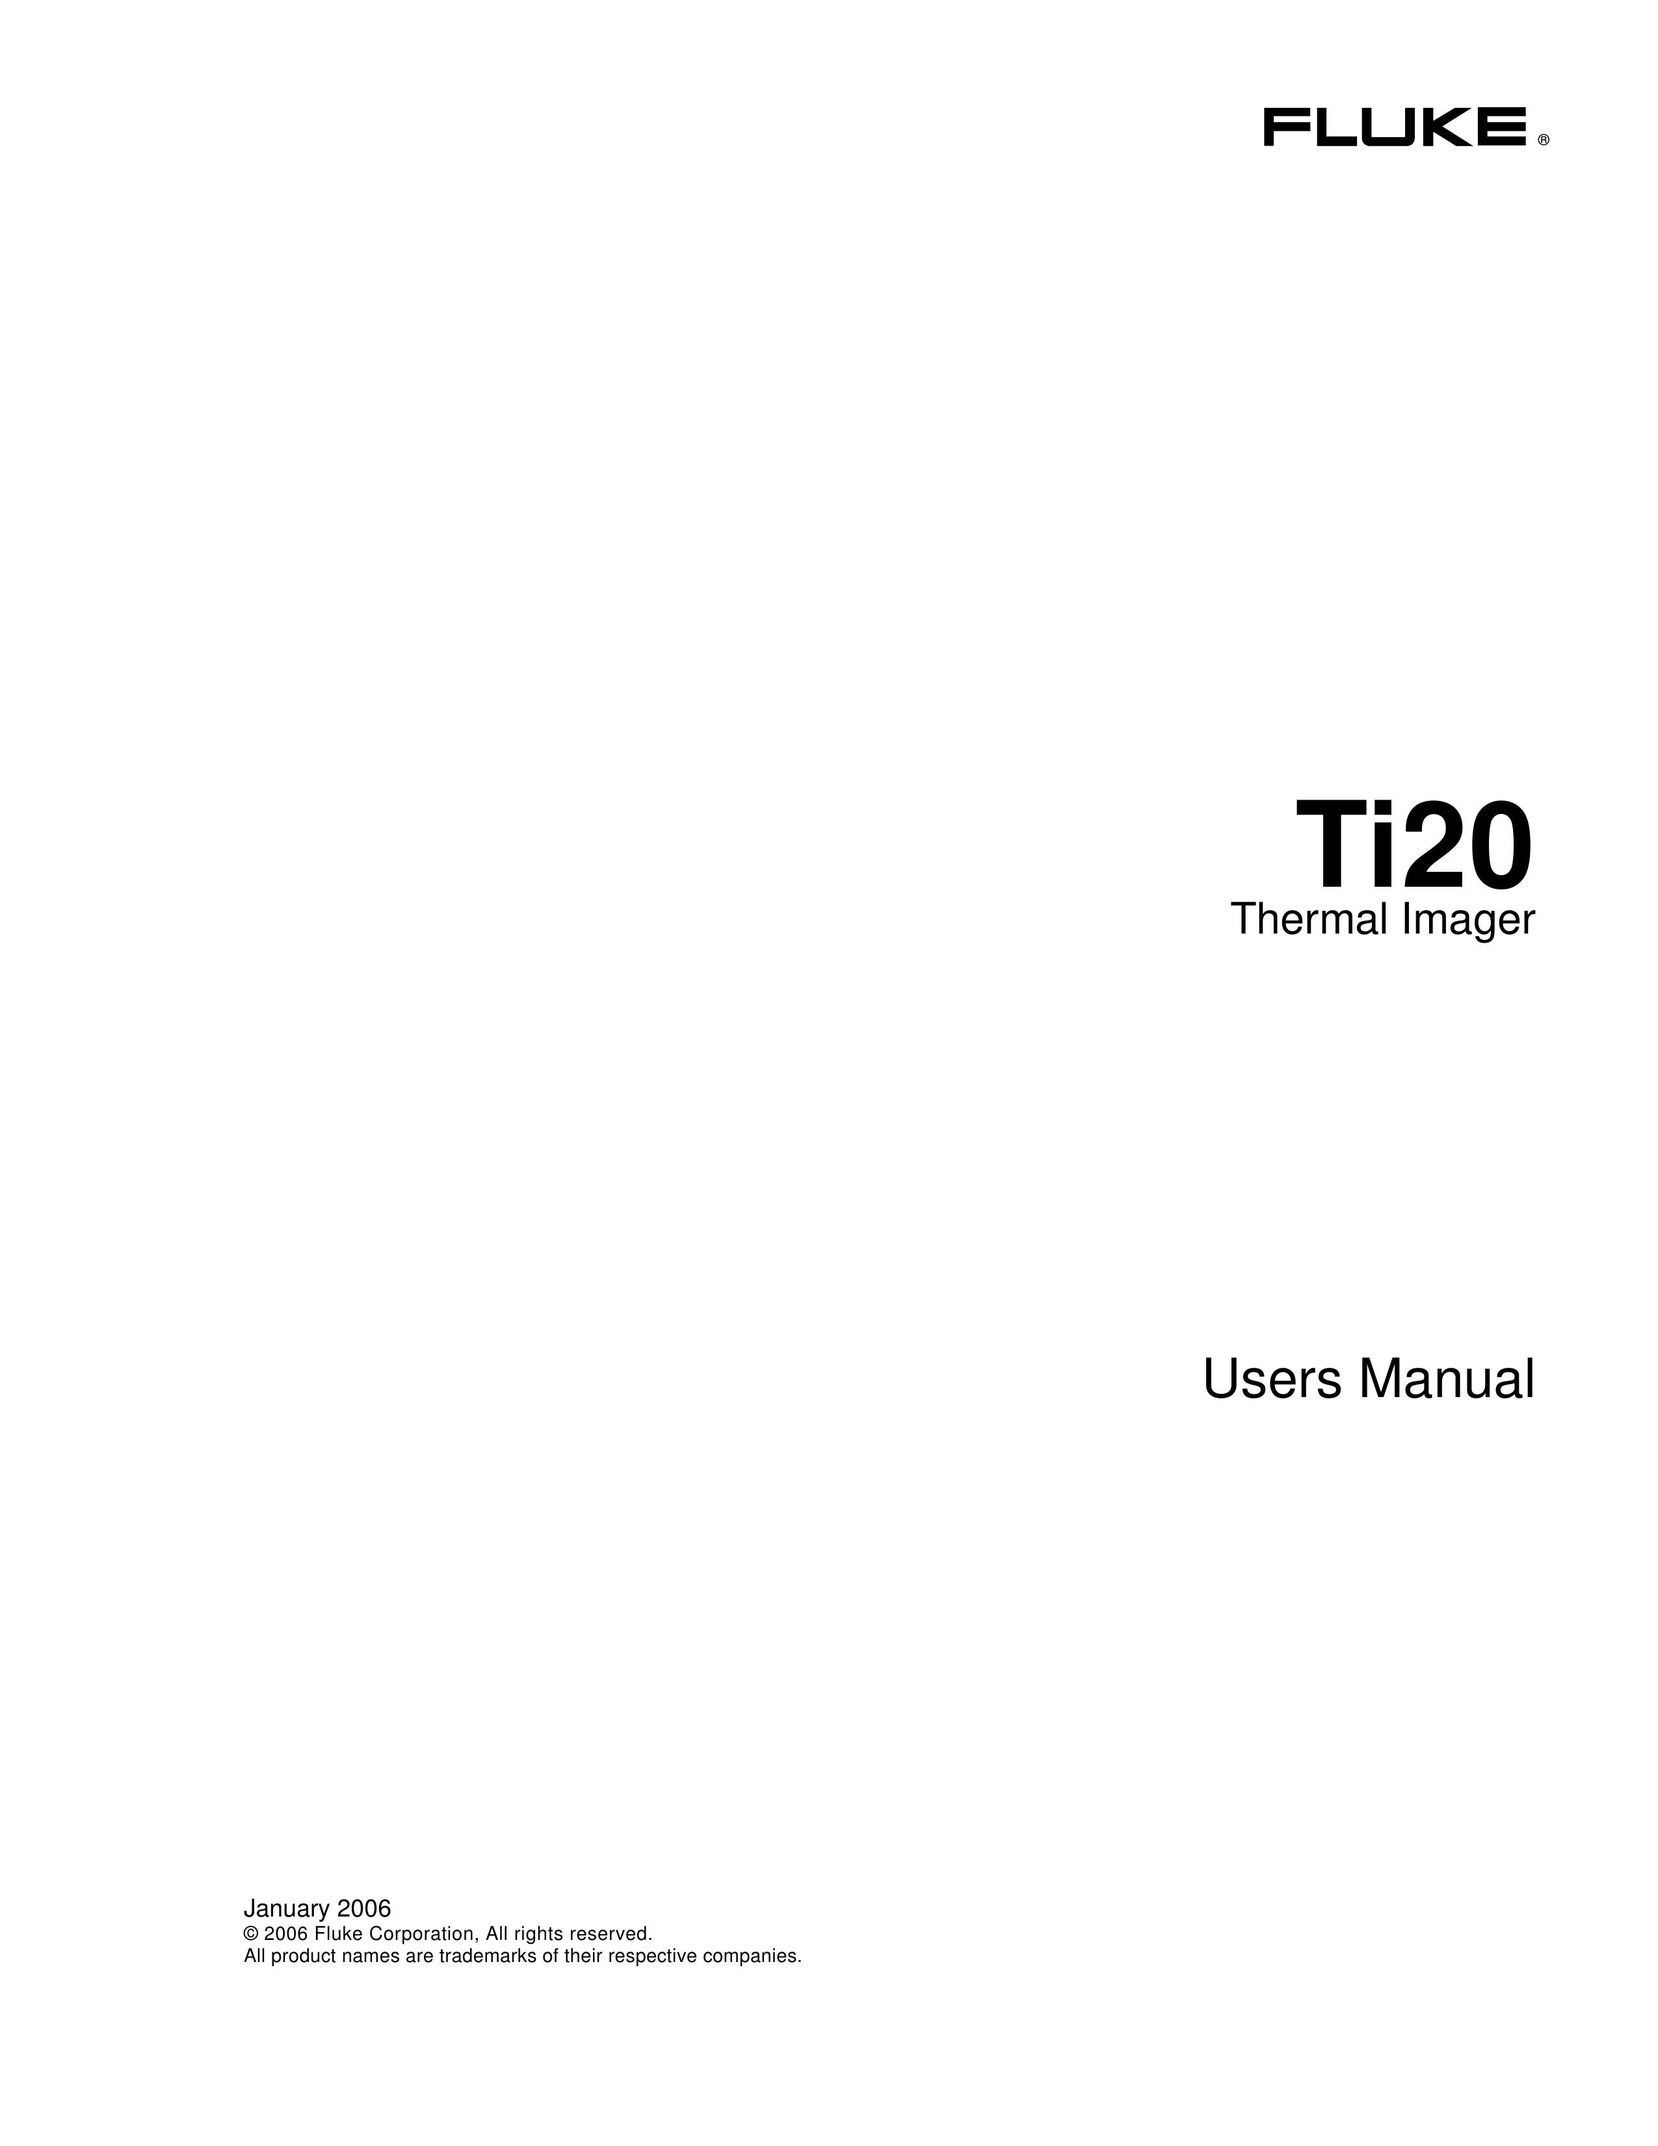 Fluke Ti20 Home Safety Product User Manual